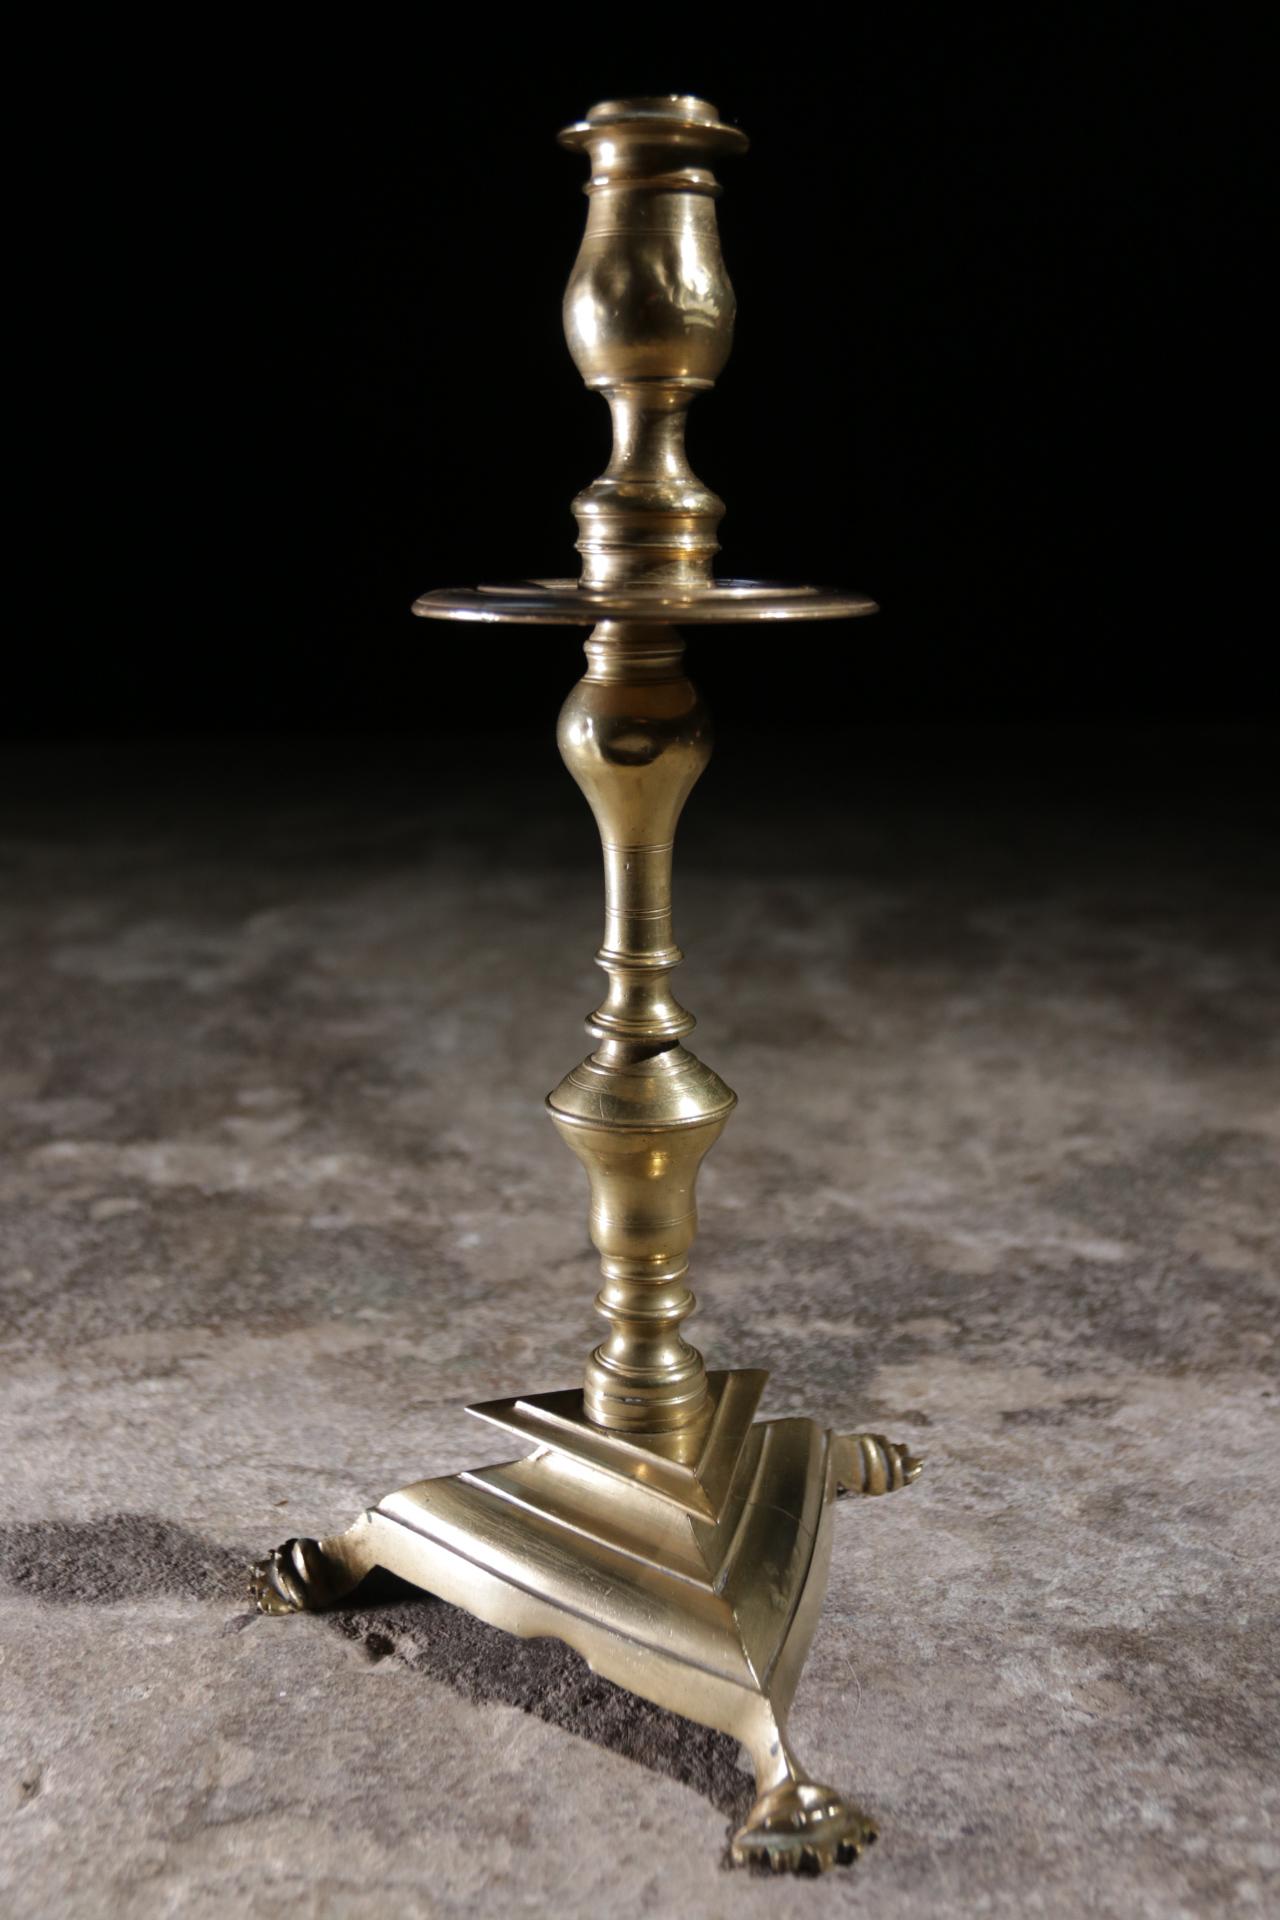 17th century candlestick from France made of brass. The candlestick has traces of use as you can expect after more than 300 years of use.